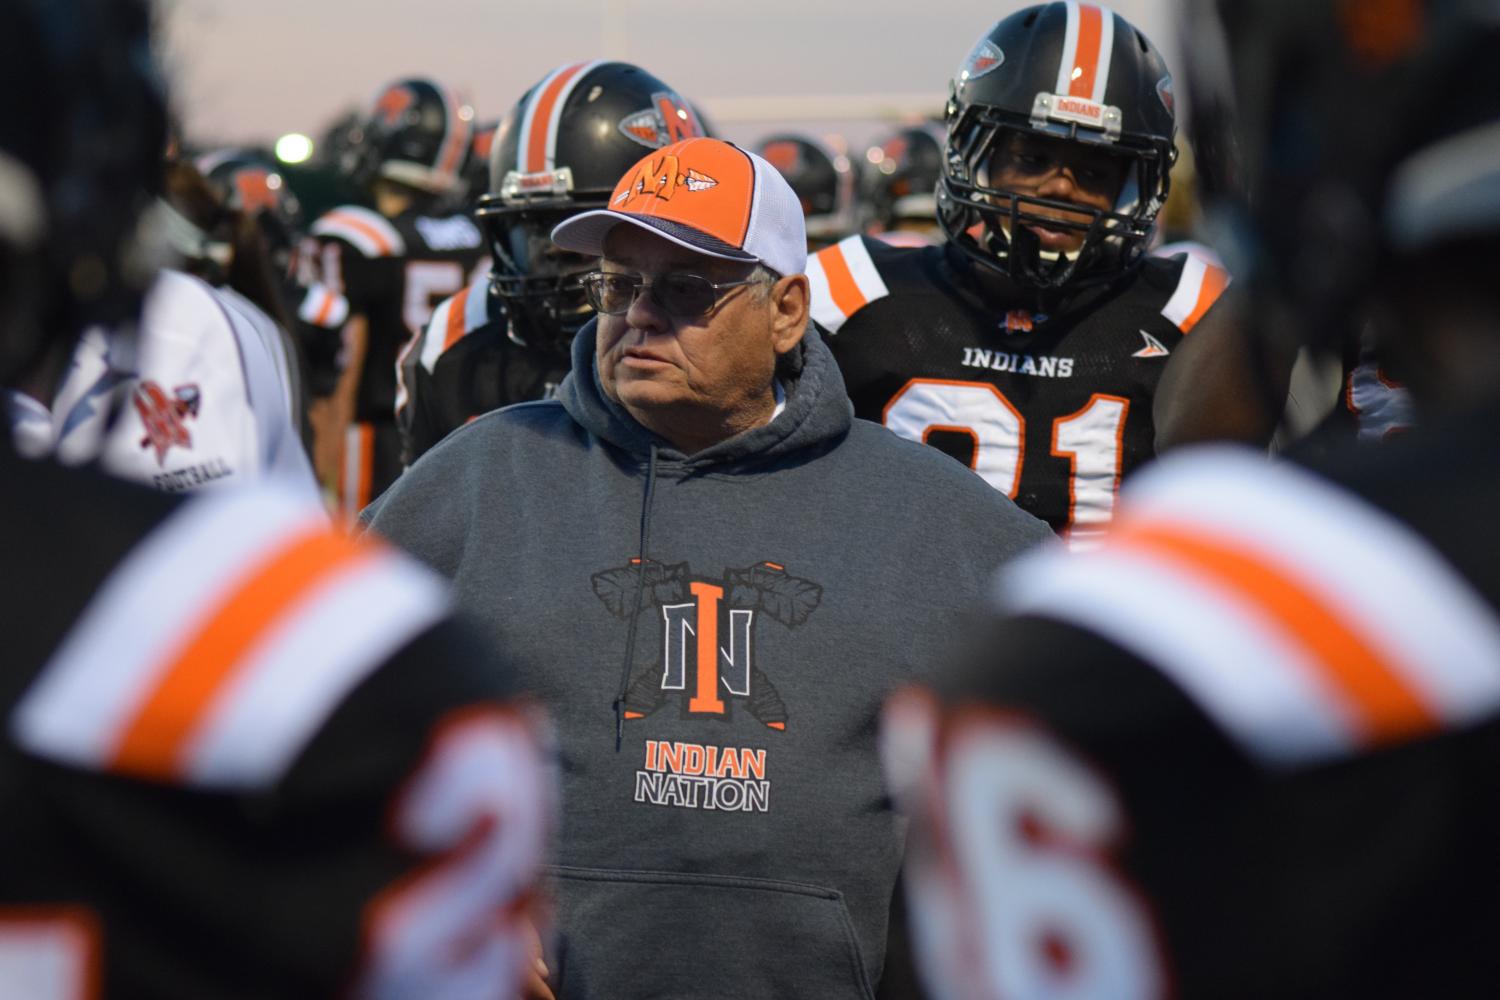 Head+coach+Terry+McCombs+addresses+the+Minooka+team+during+a+game+against+Joliet+Central+on+Sept.+1.++The+Indians+defeated+the+Steelmen+42-0.